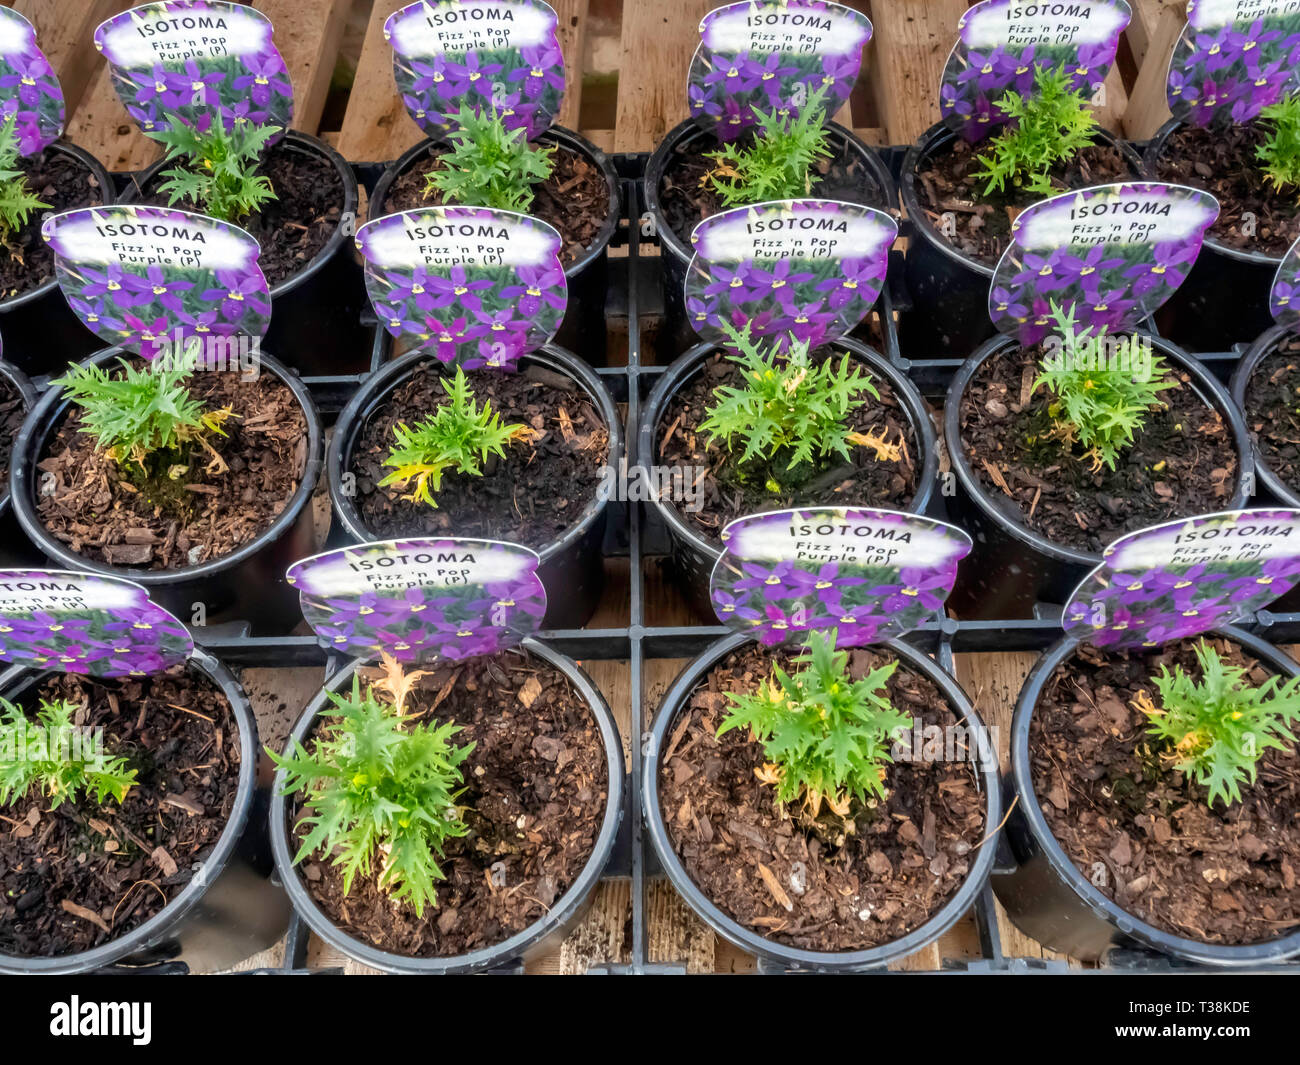 Plant nursery display of young flower plants in a greenhouse in early spring,   Isotoma Fizz n pop Purple  for later sale as bedding plants Stock Photo